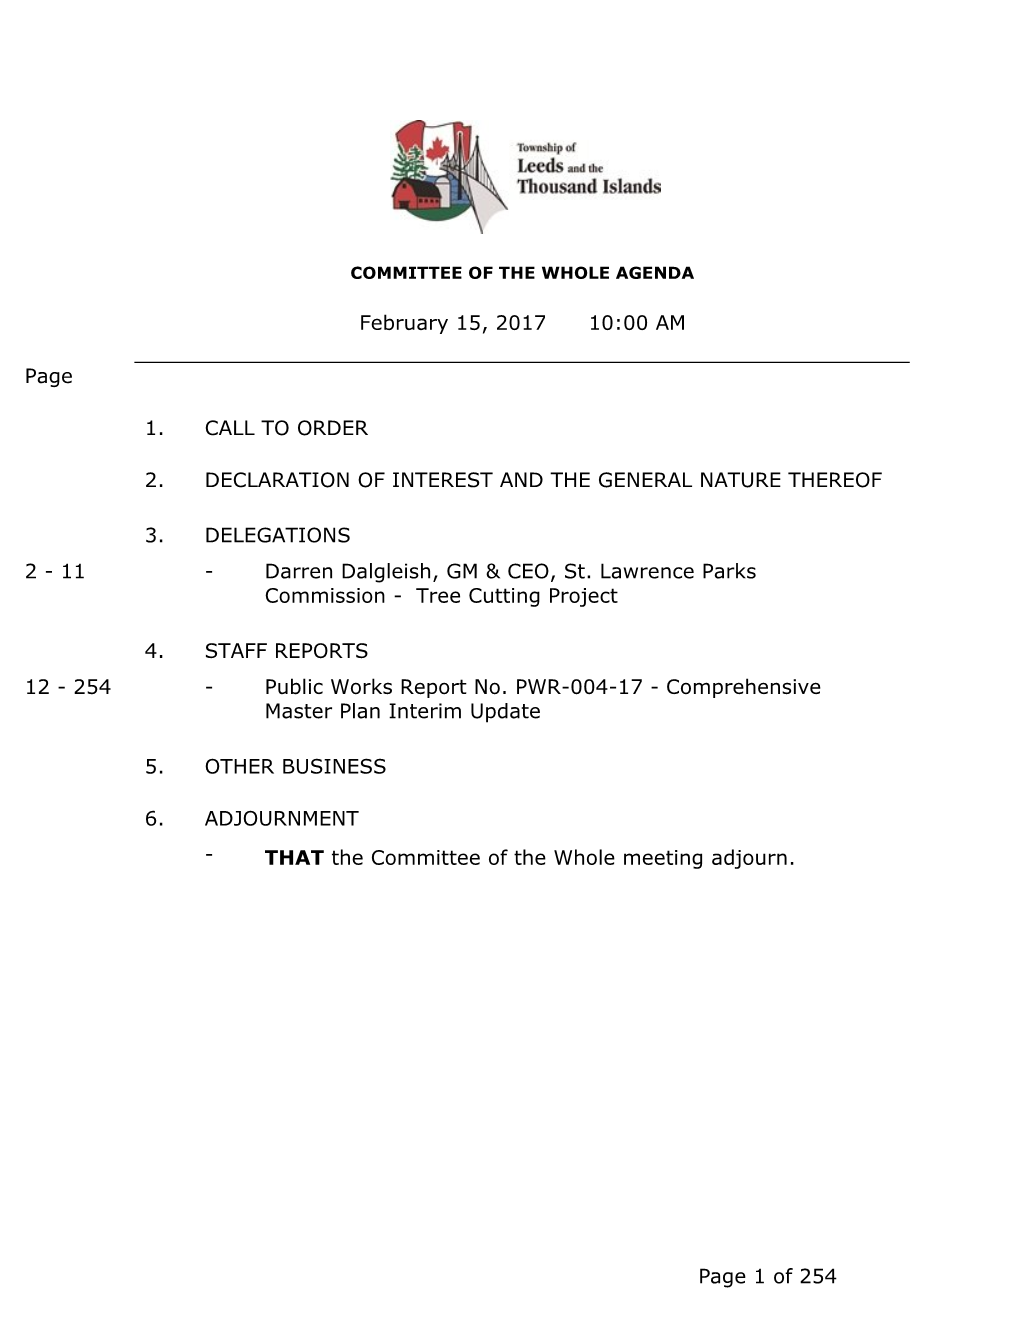 Committee of the Whole Agenda